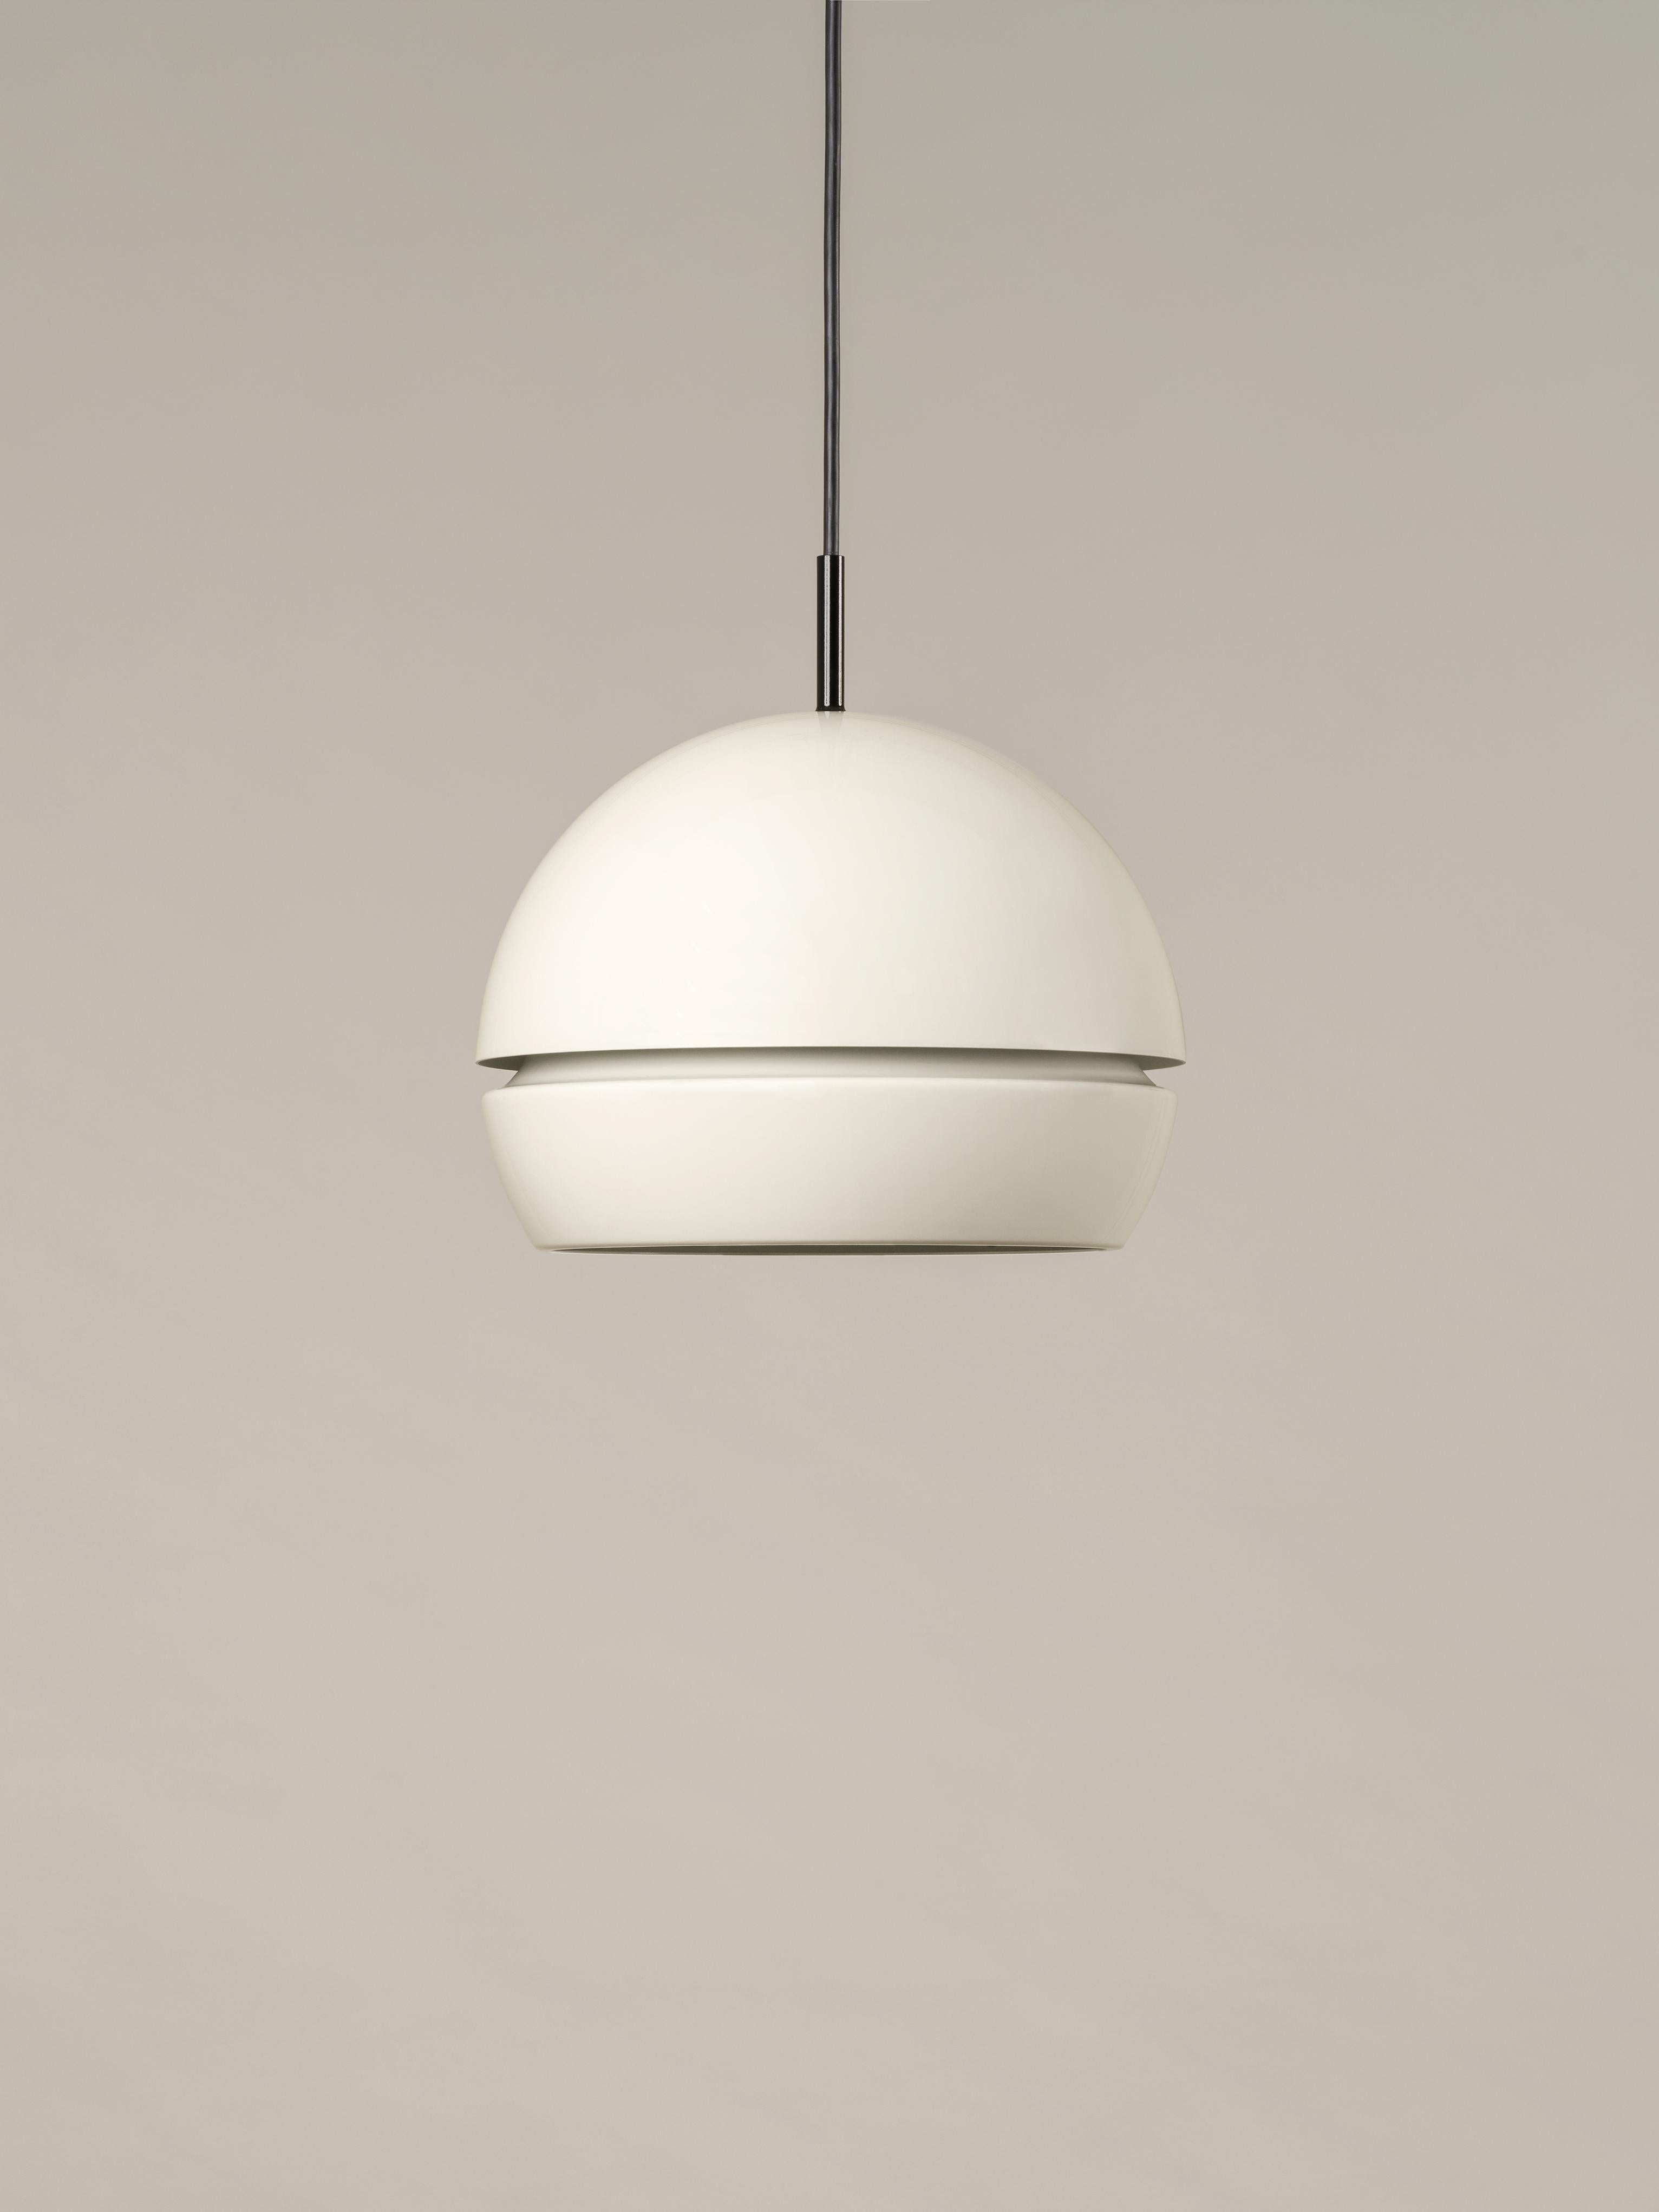 Fontana pendant lamp by André Ricard.
Dimensions: D 35 x H 35 cm.
Materials: metal, plastic.

Designed by André Ricard in 1970, Fontana defends its futuristic appearance through the generous size of its more than half-sphere and the unmistakable